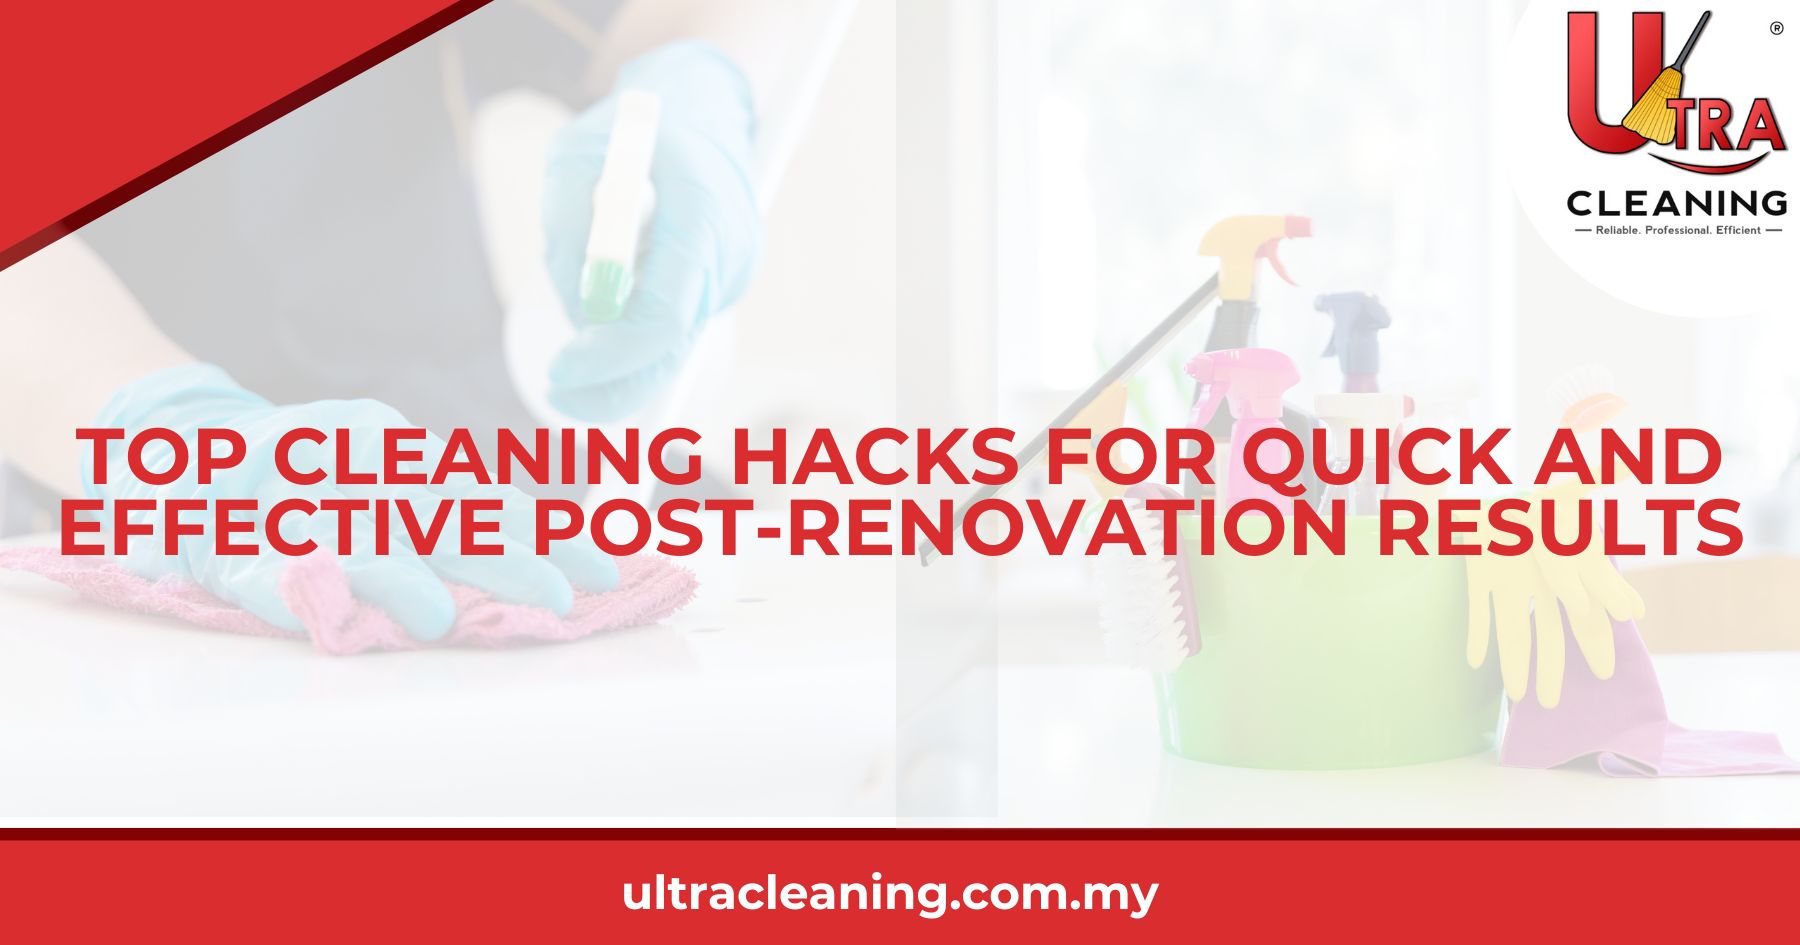 Top Cleaning Hacks for Quick and Effective Post-Renovation Results